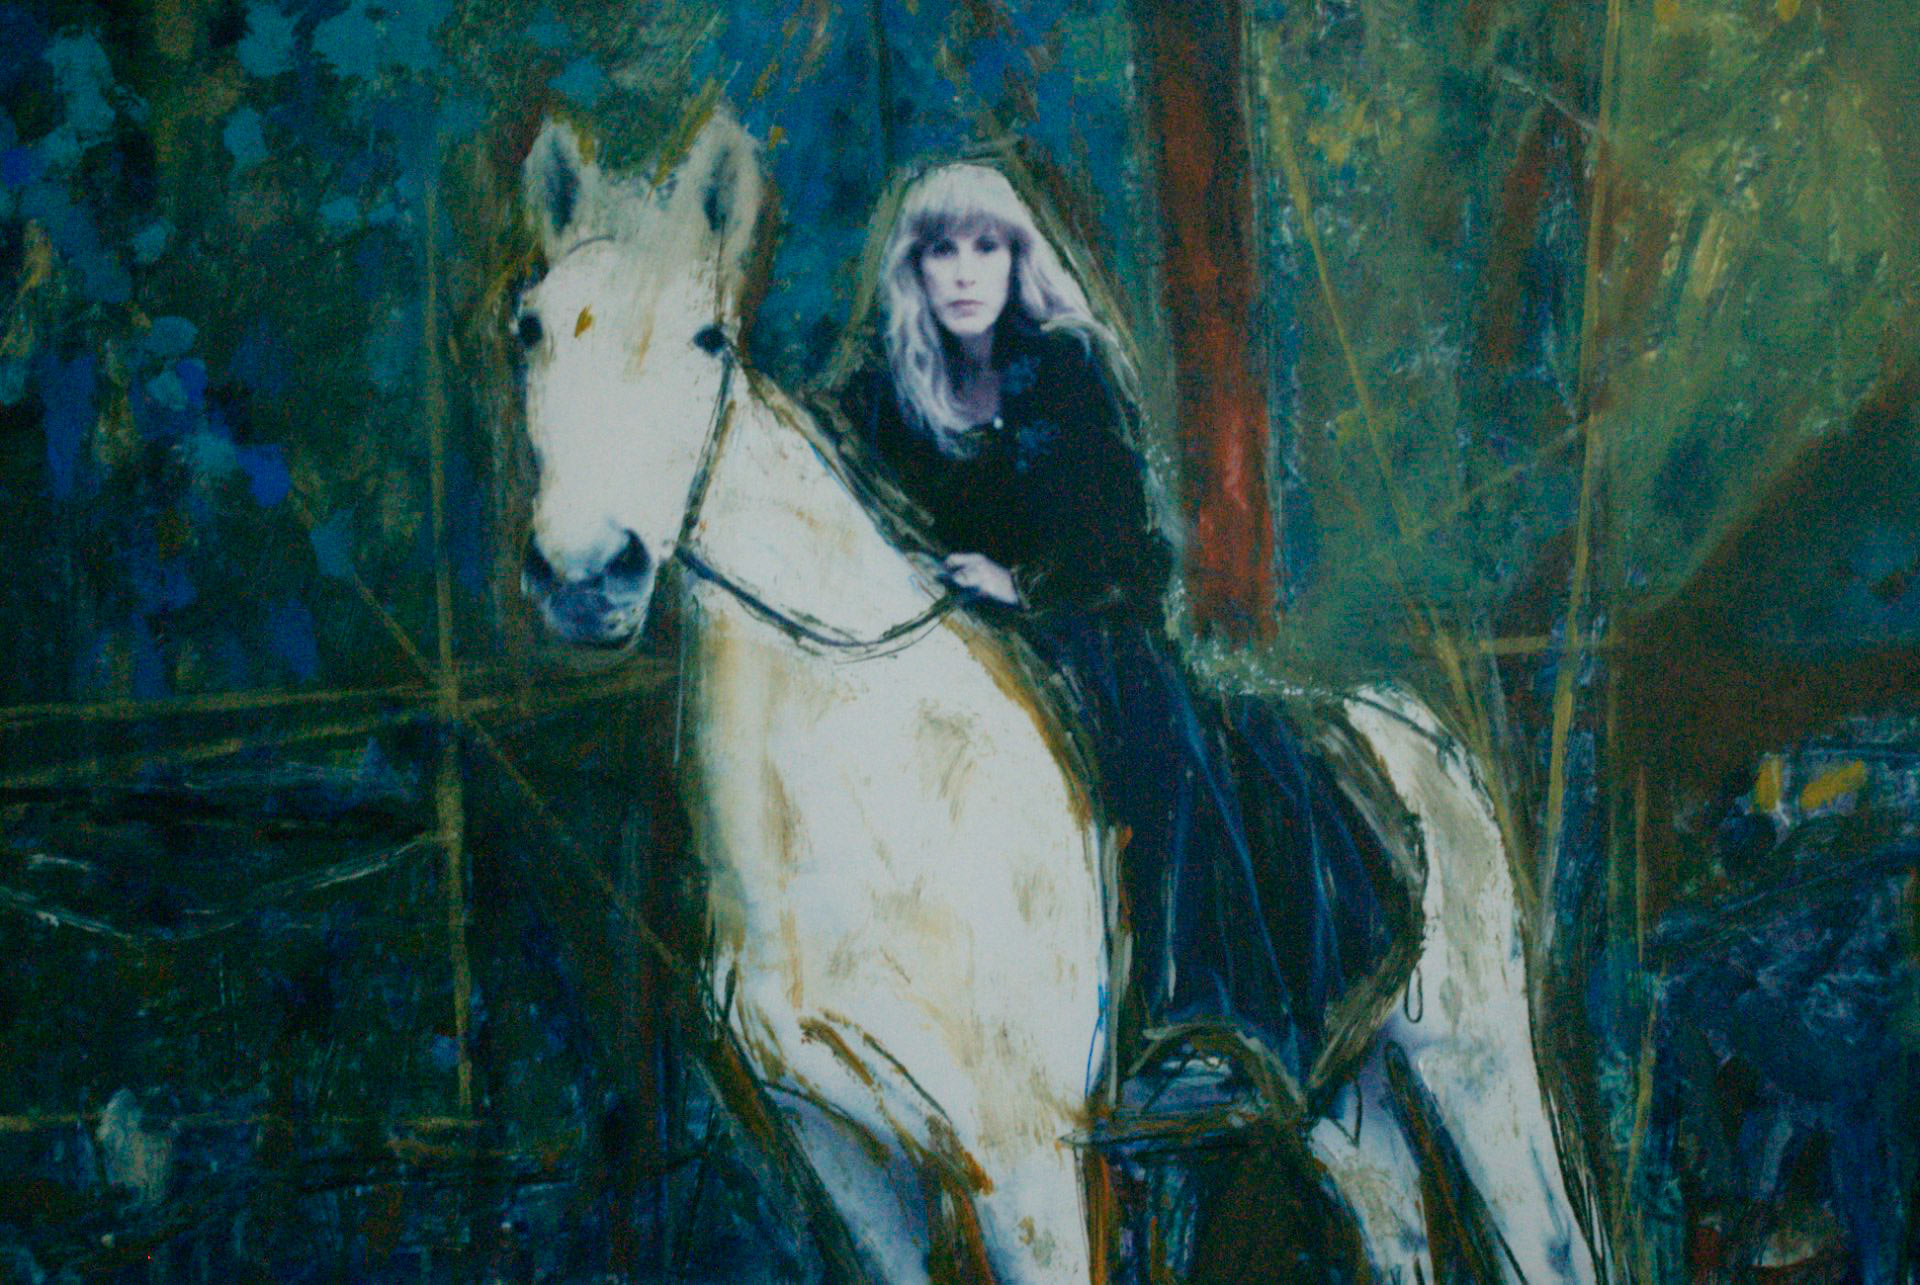 Merle Hoffman, On My White Horse Dreaming of Battles to Come.